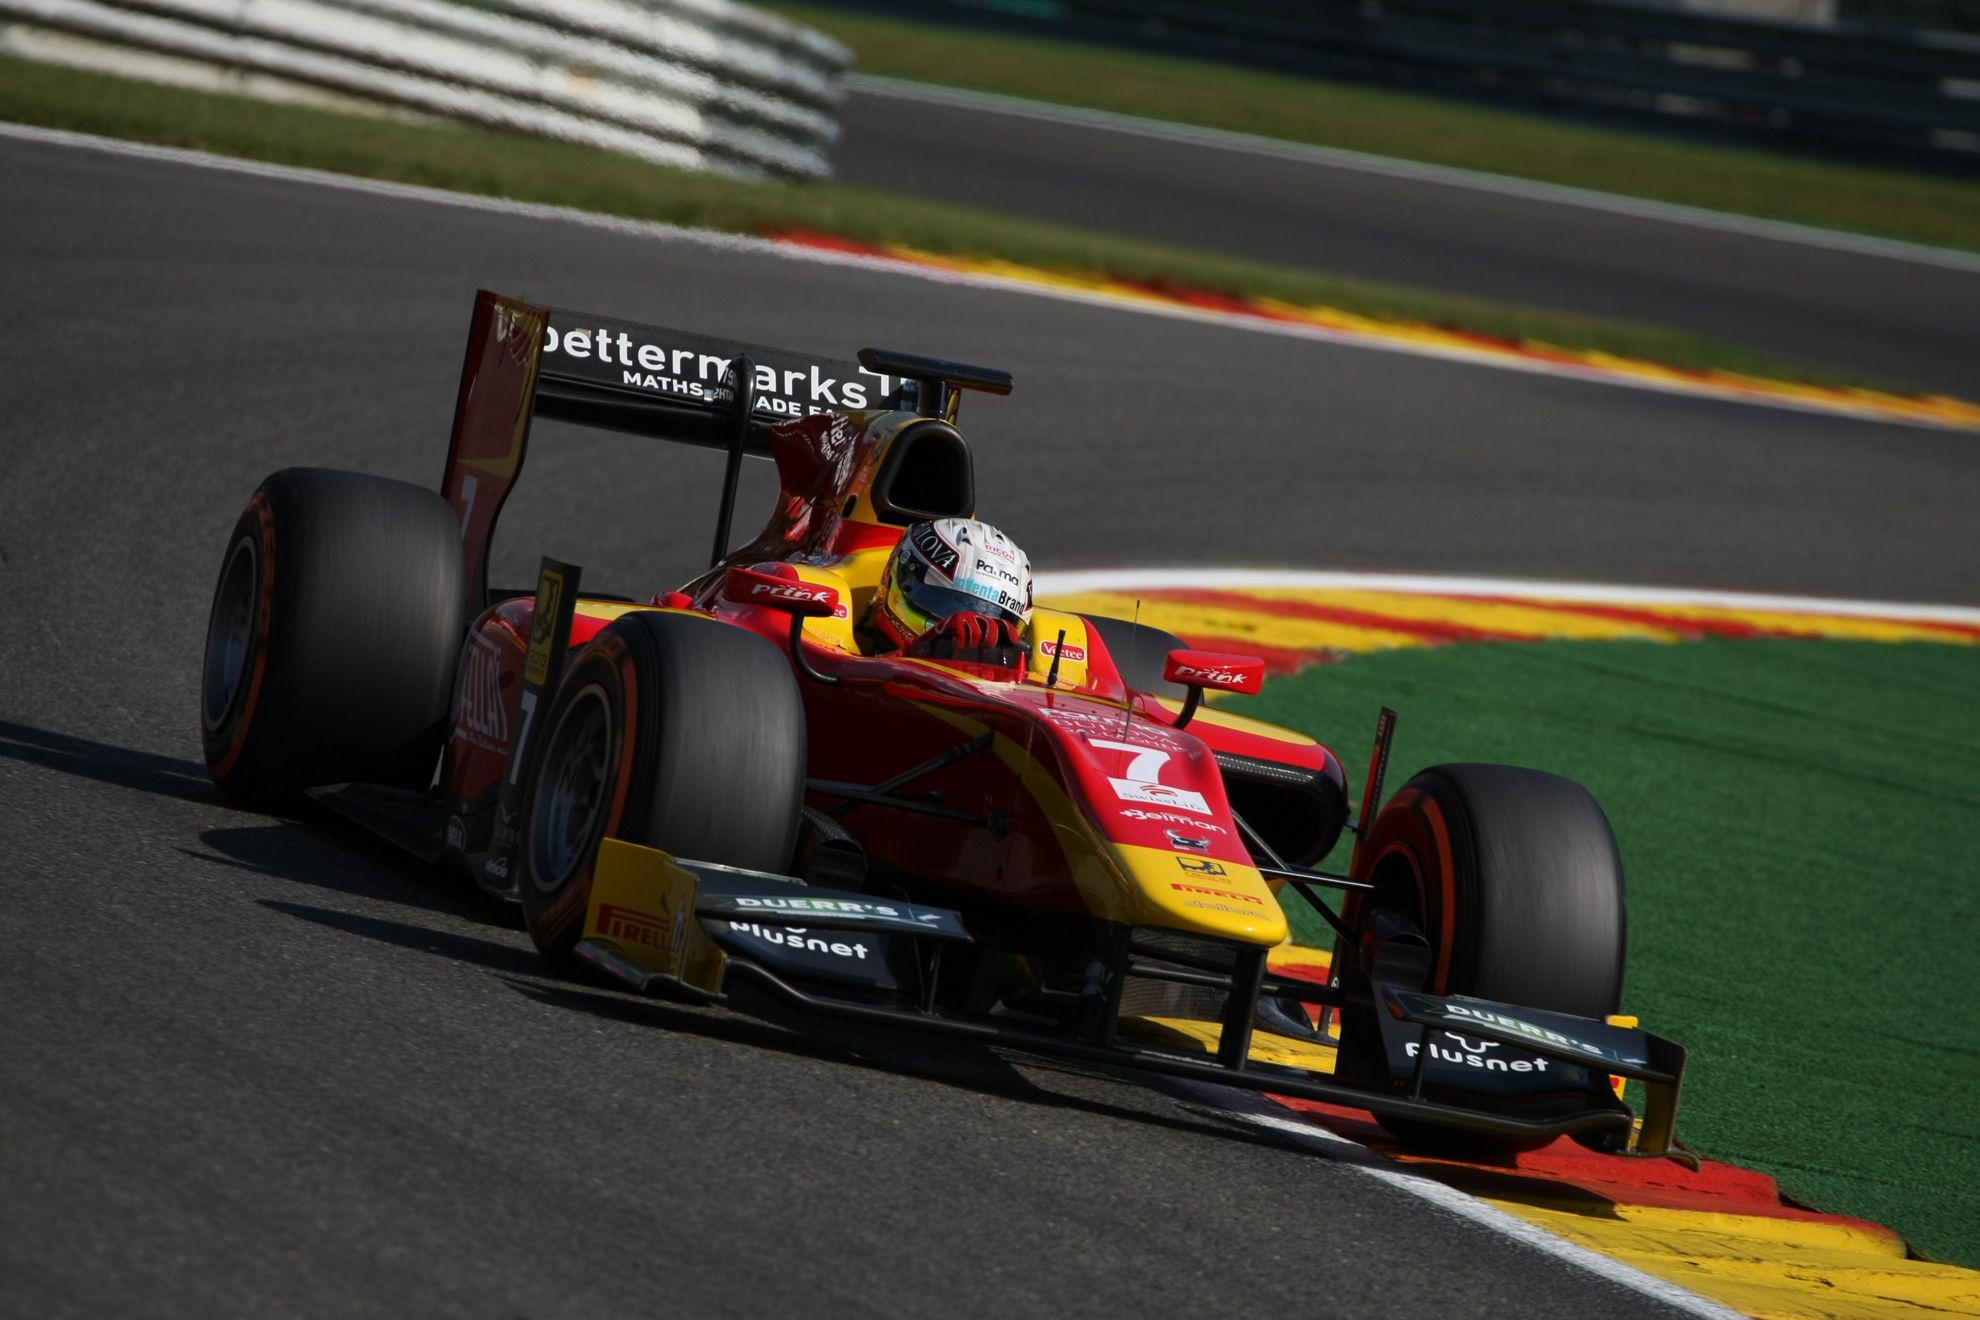 Jordan King achieved his first GP2 Podium finish at one of the world’s greatest drivers circuits